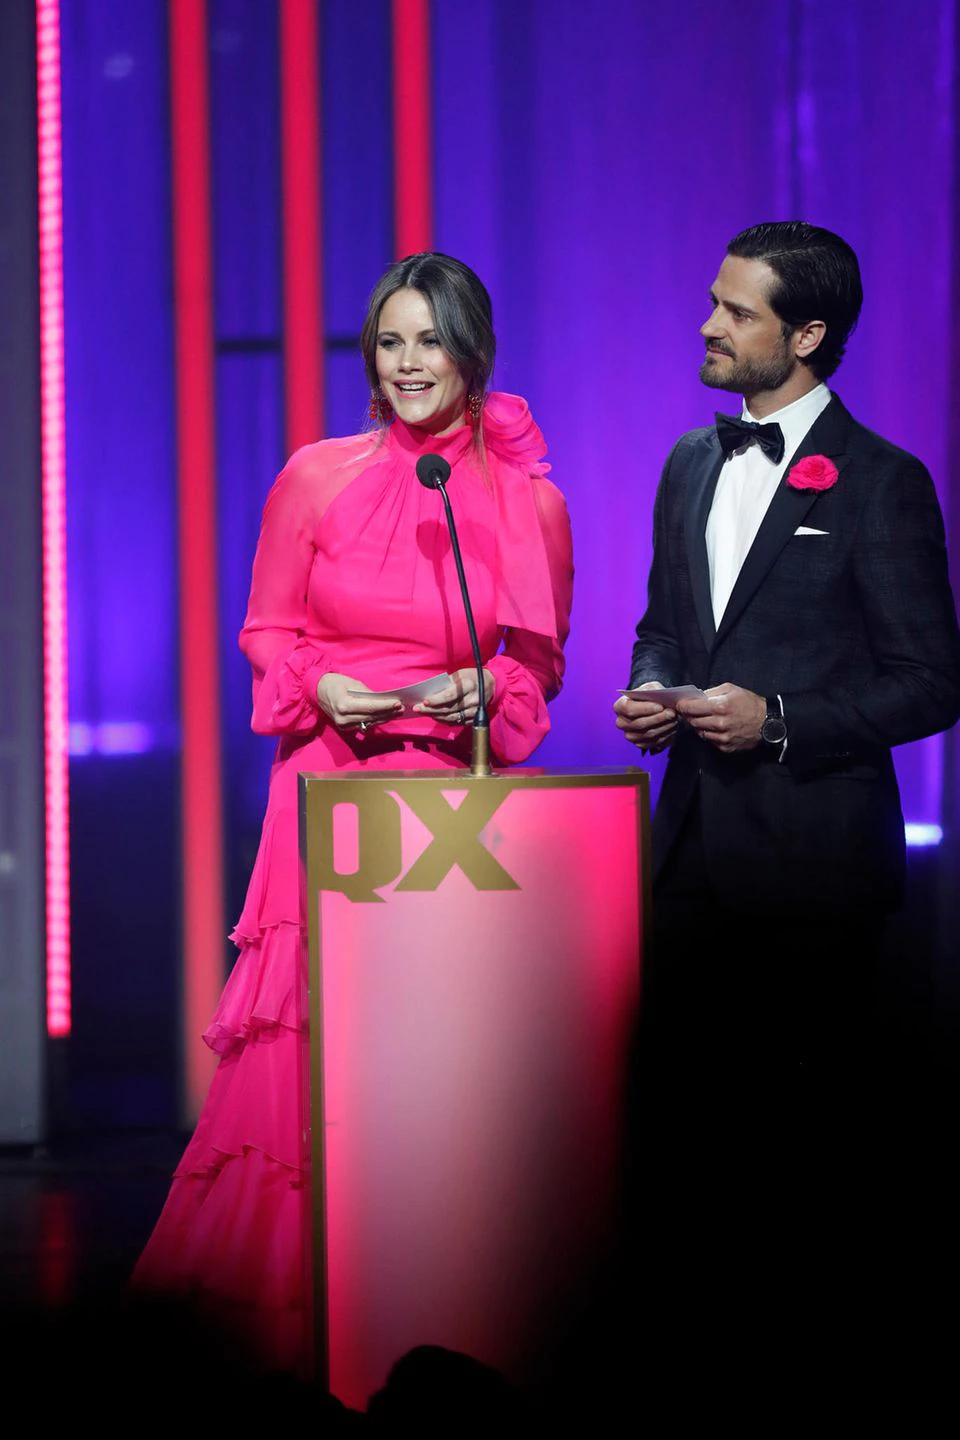 Princess Sofia and Prince Carl Philip of Sweden at the OX Awards Gala. 